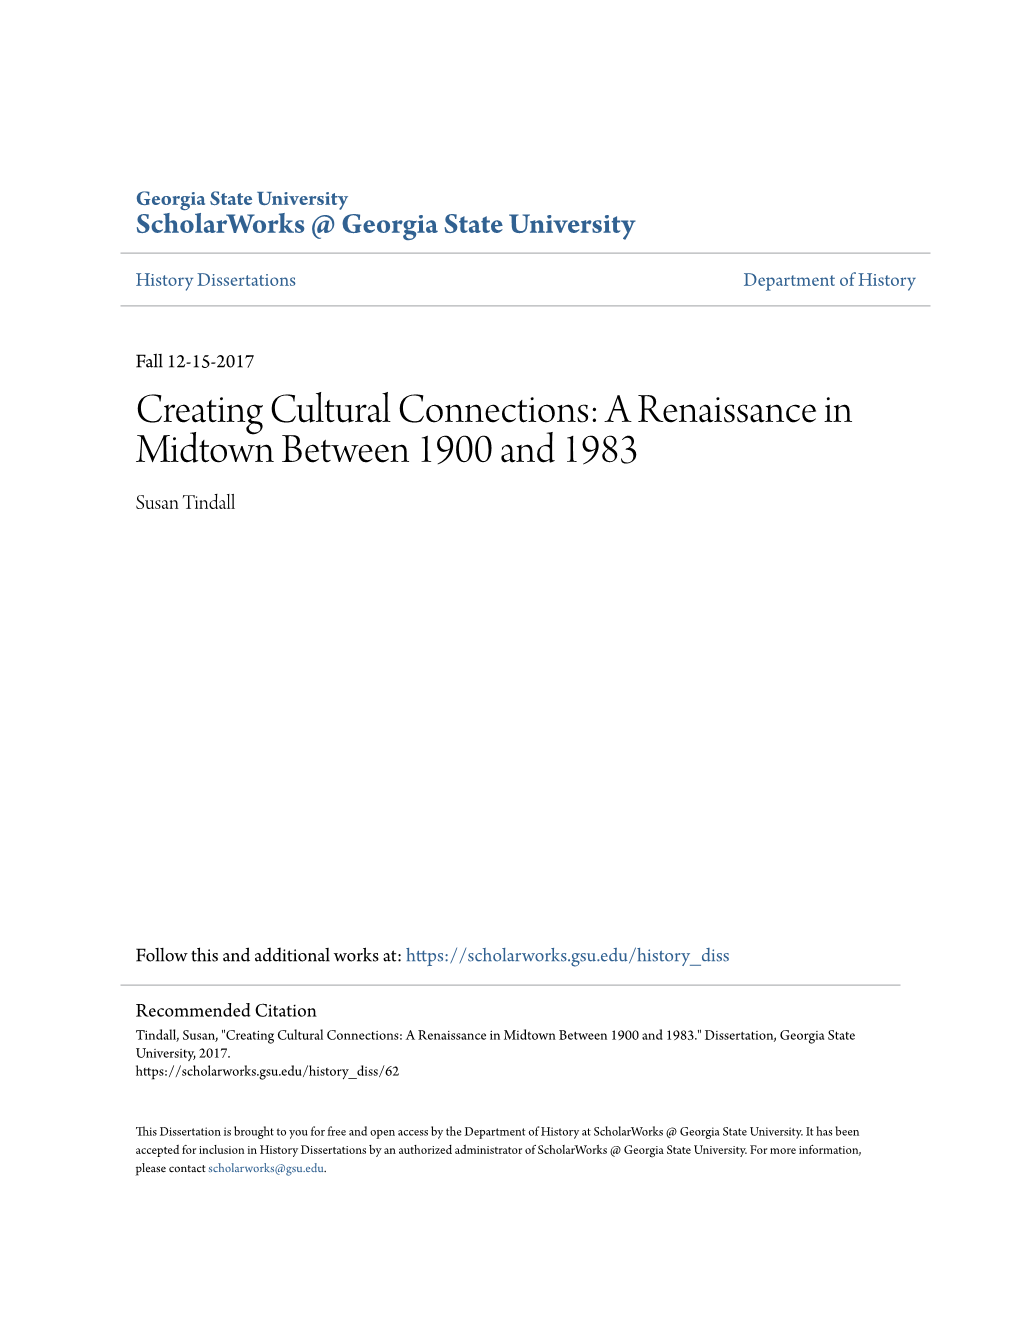 Creating Cultural Connections: a Renaissance in Midtown Between 1900 and 1983 Susan Tindall